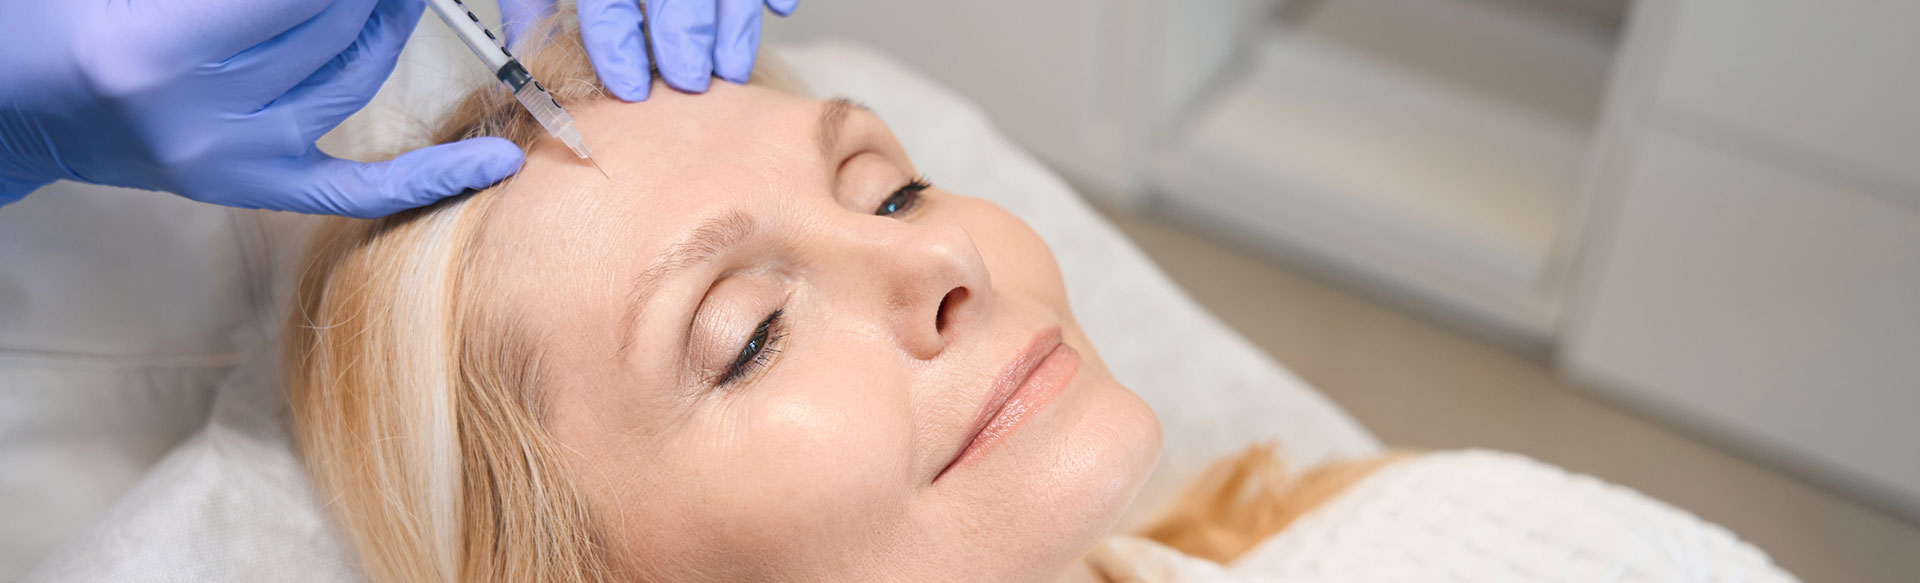 Demystifying Botox: Exploring Common Myths and Facts